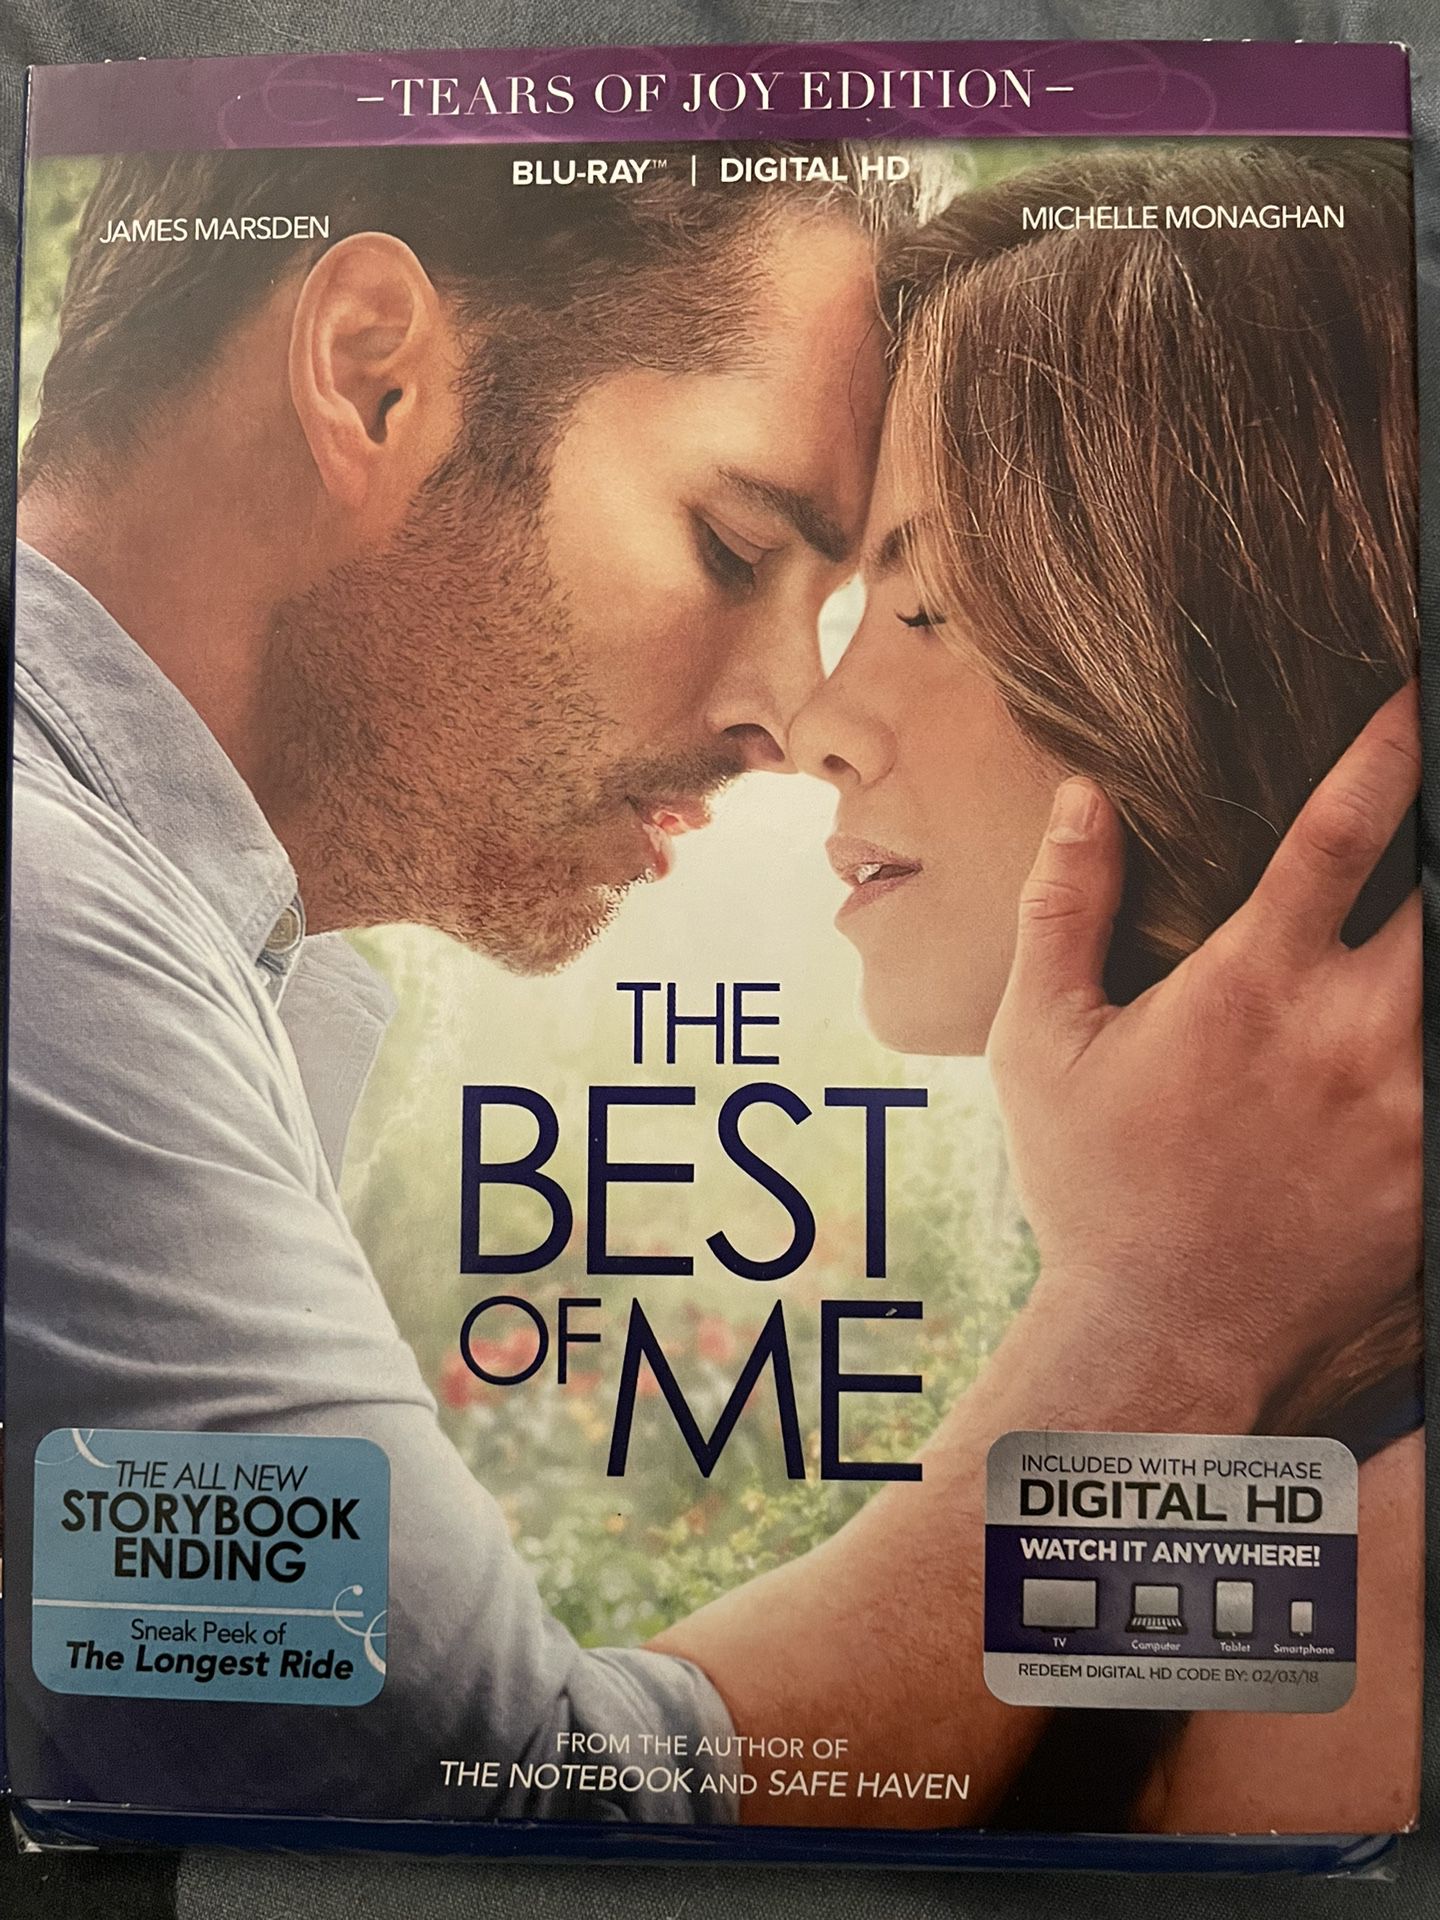 THE BEST OF ME (BLU-RAY + DIGITAL) NEW 